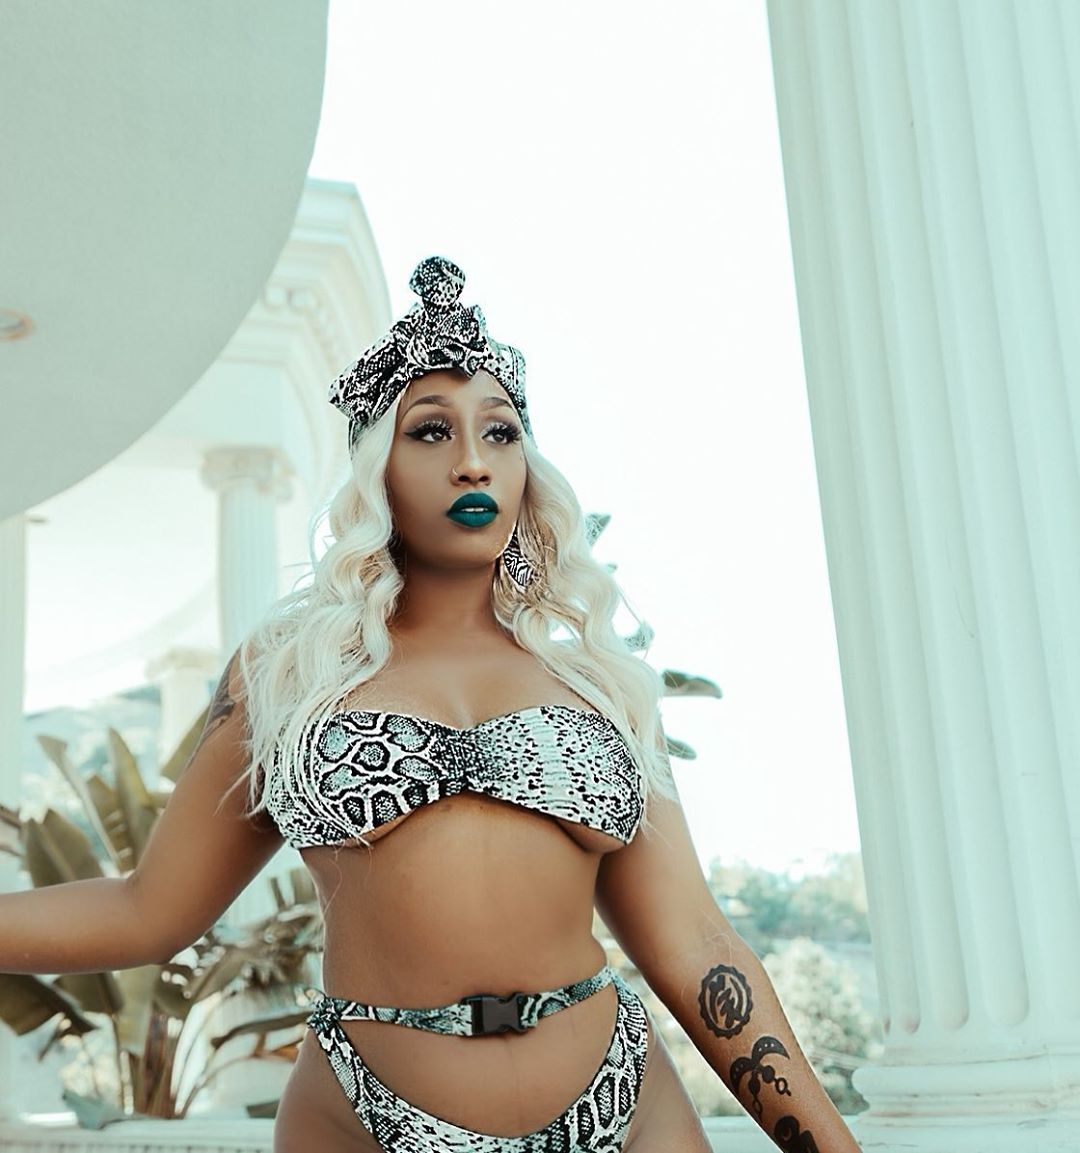 Victoria Kimani's boobs threaten to spill out of revealing shell